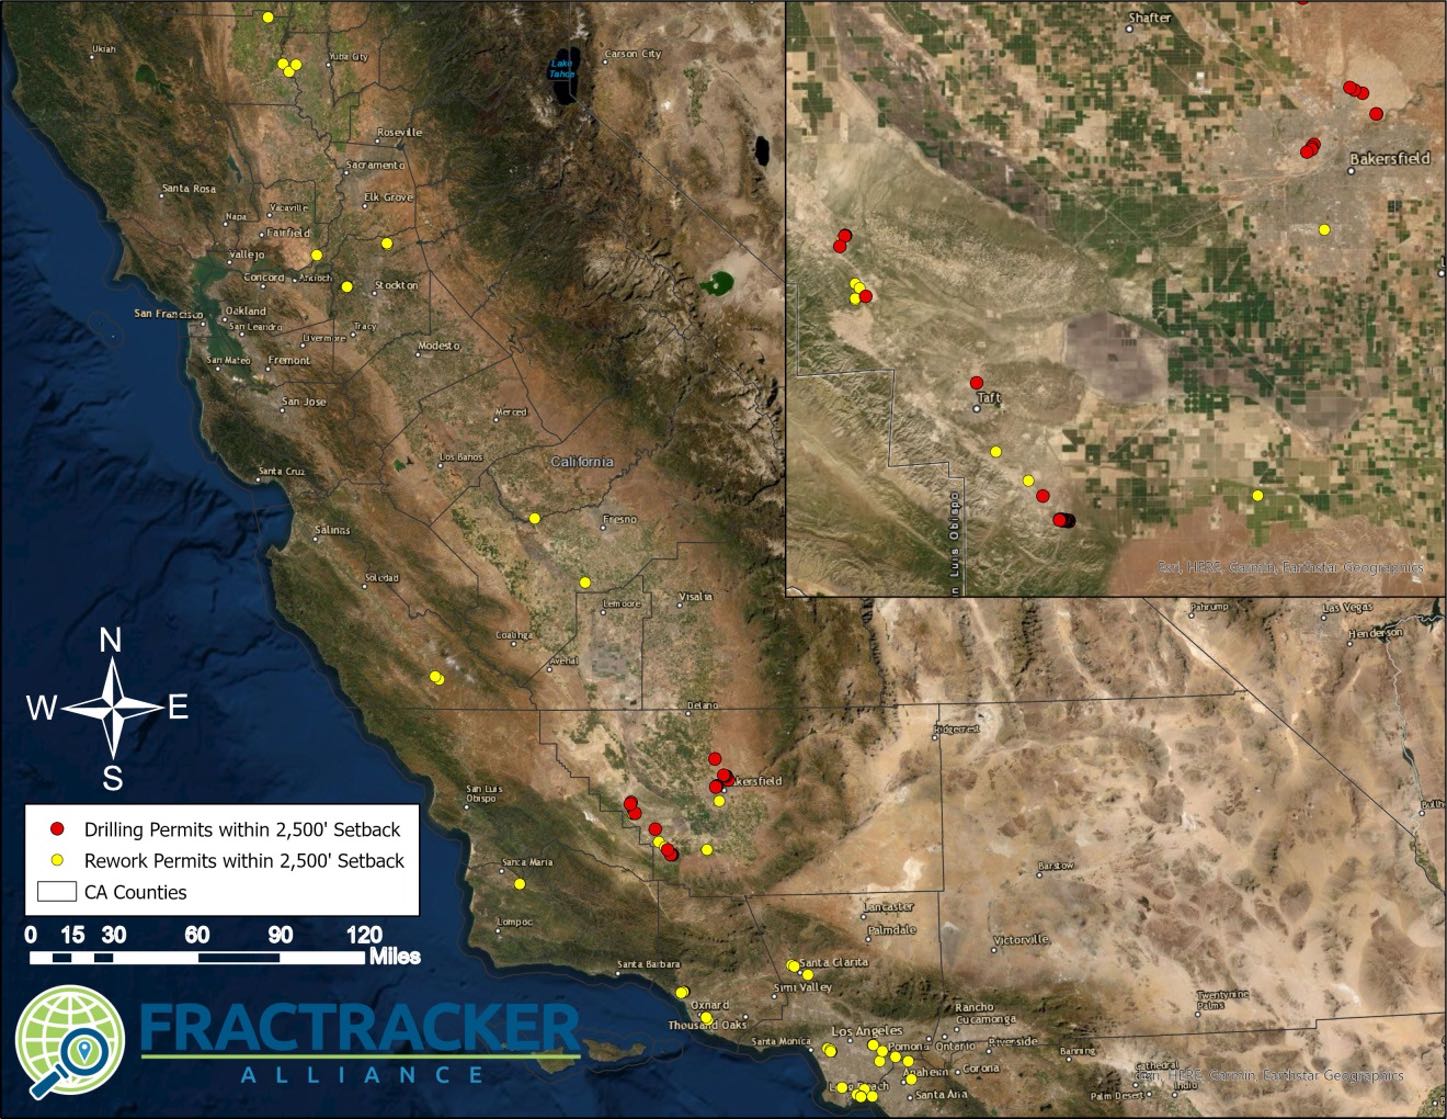 drilling sites in california permitted within 2,500’ of a home, school, healthcare facility, daycare, or prison, just since January 1, 2021